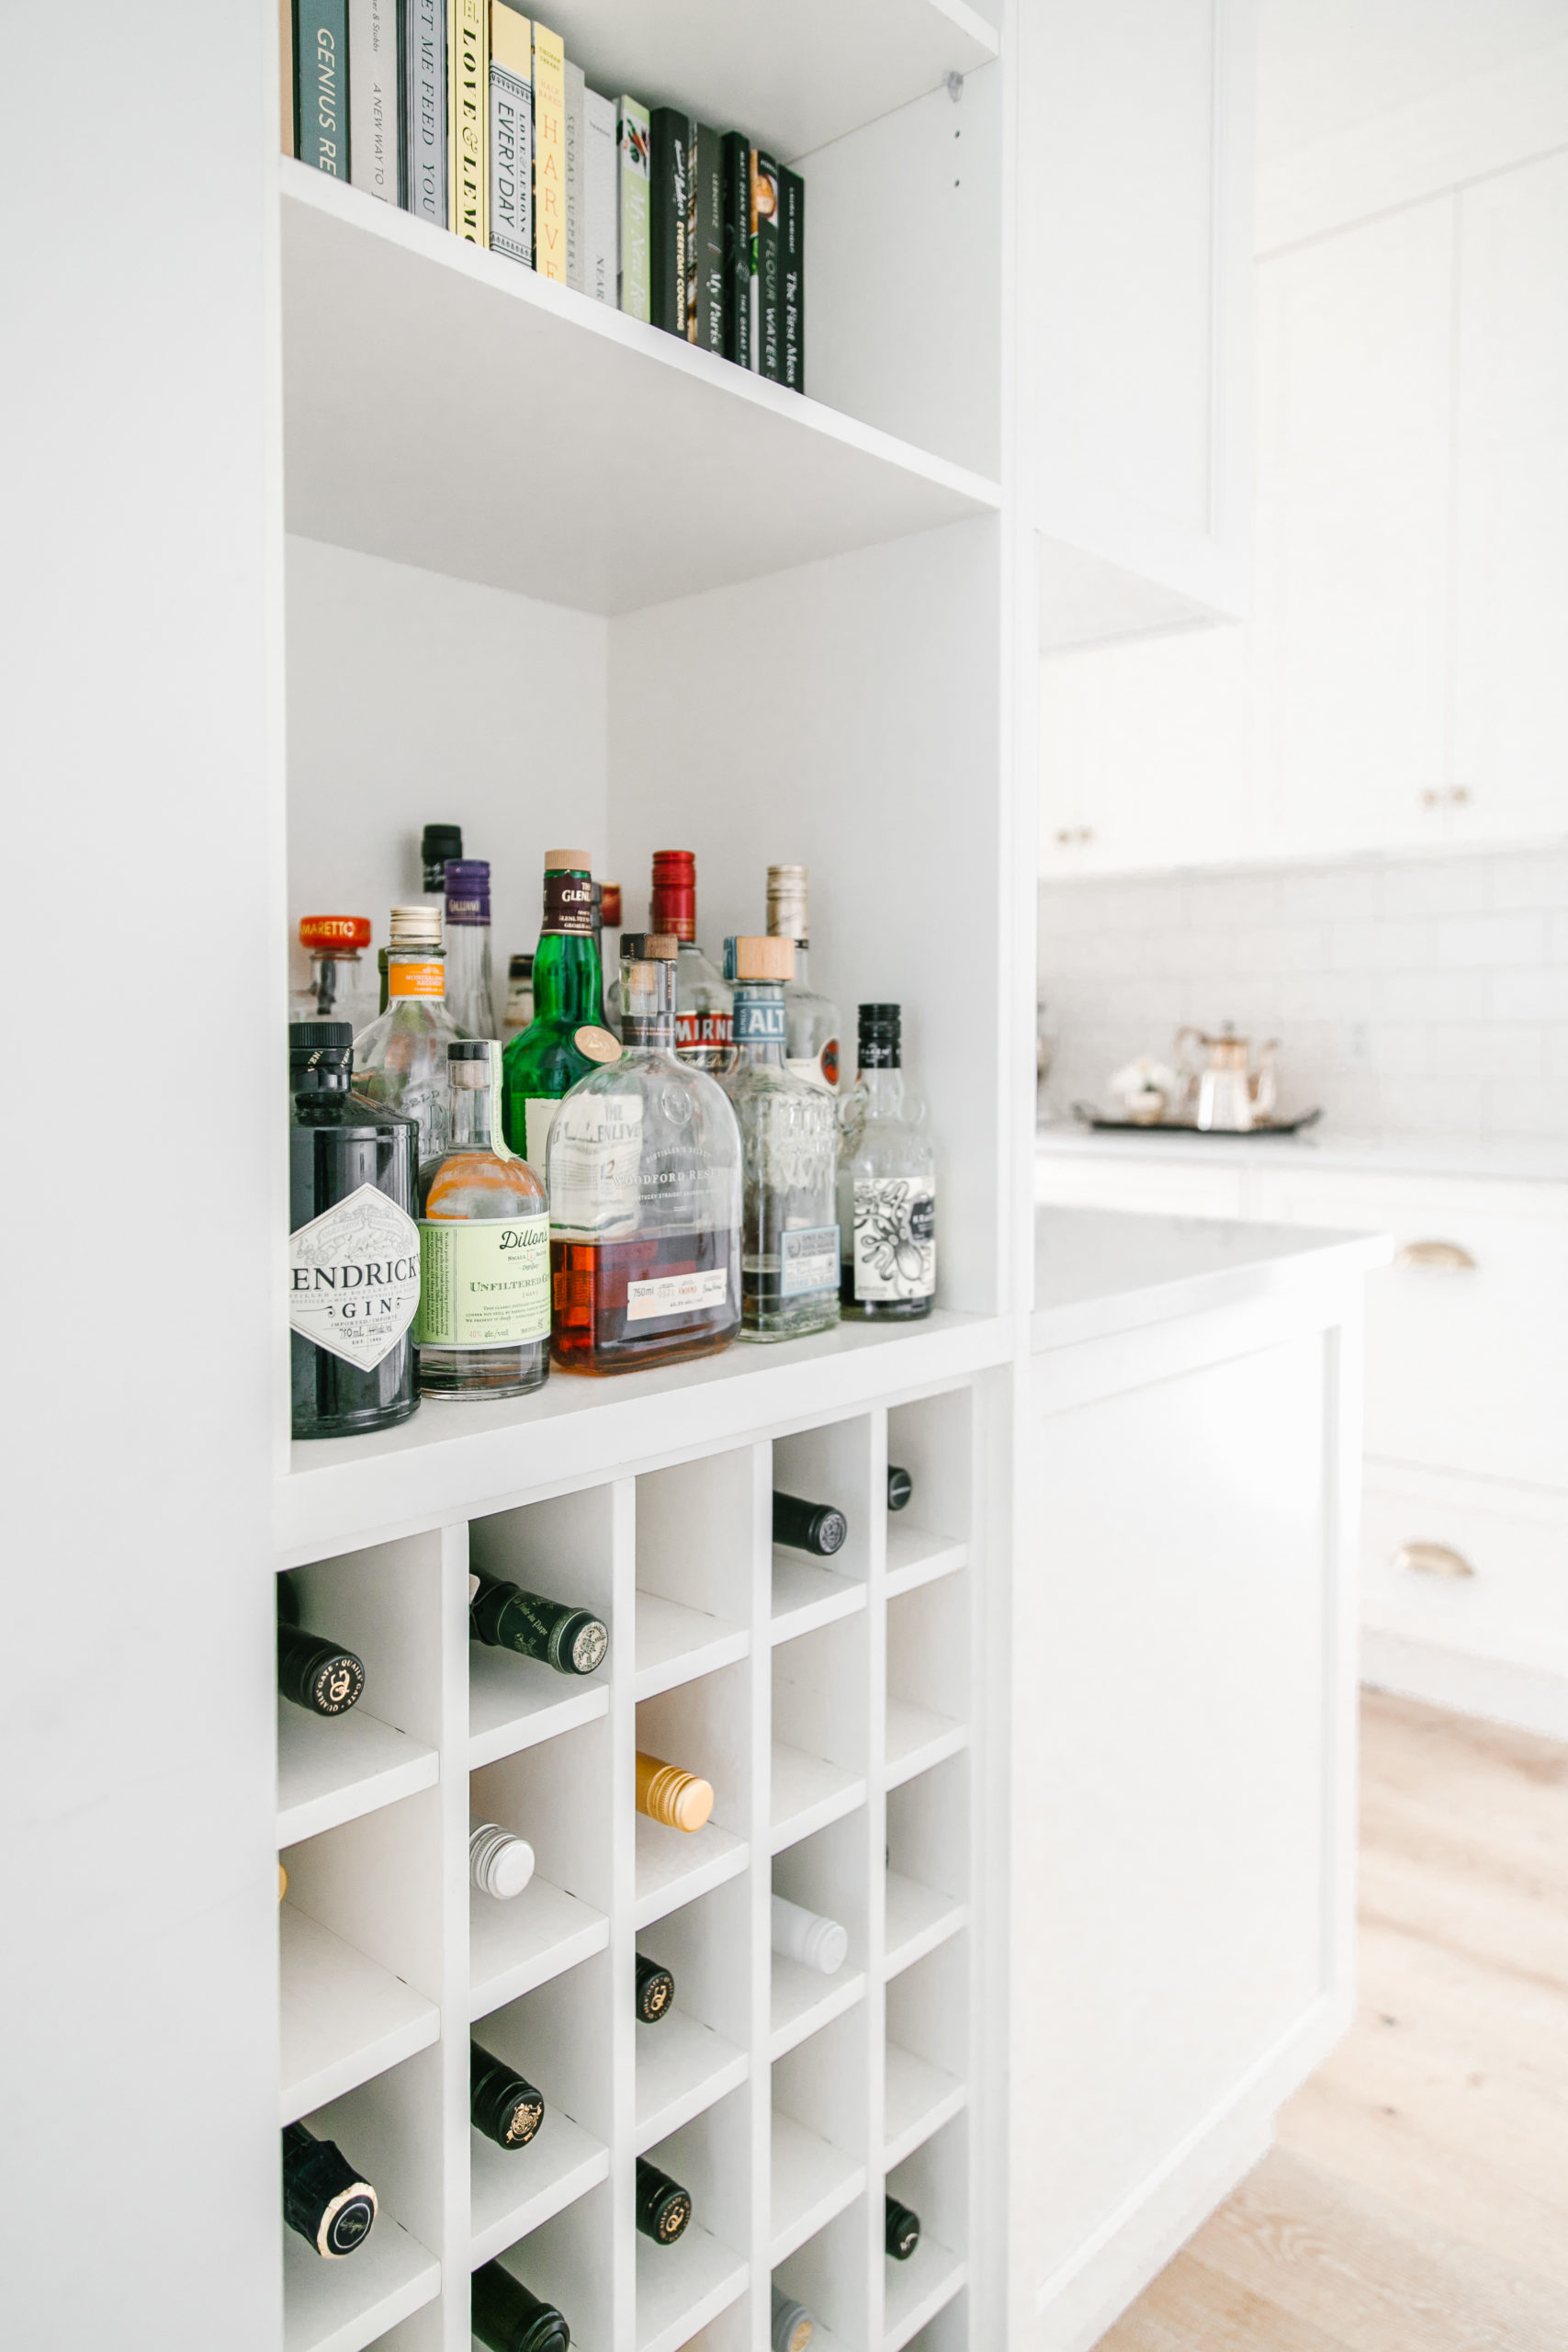 Butler pantry with a bar area for storing wine, spirits and cookbooks.